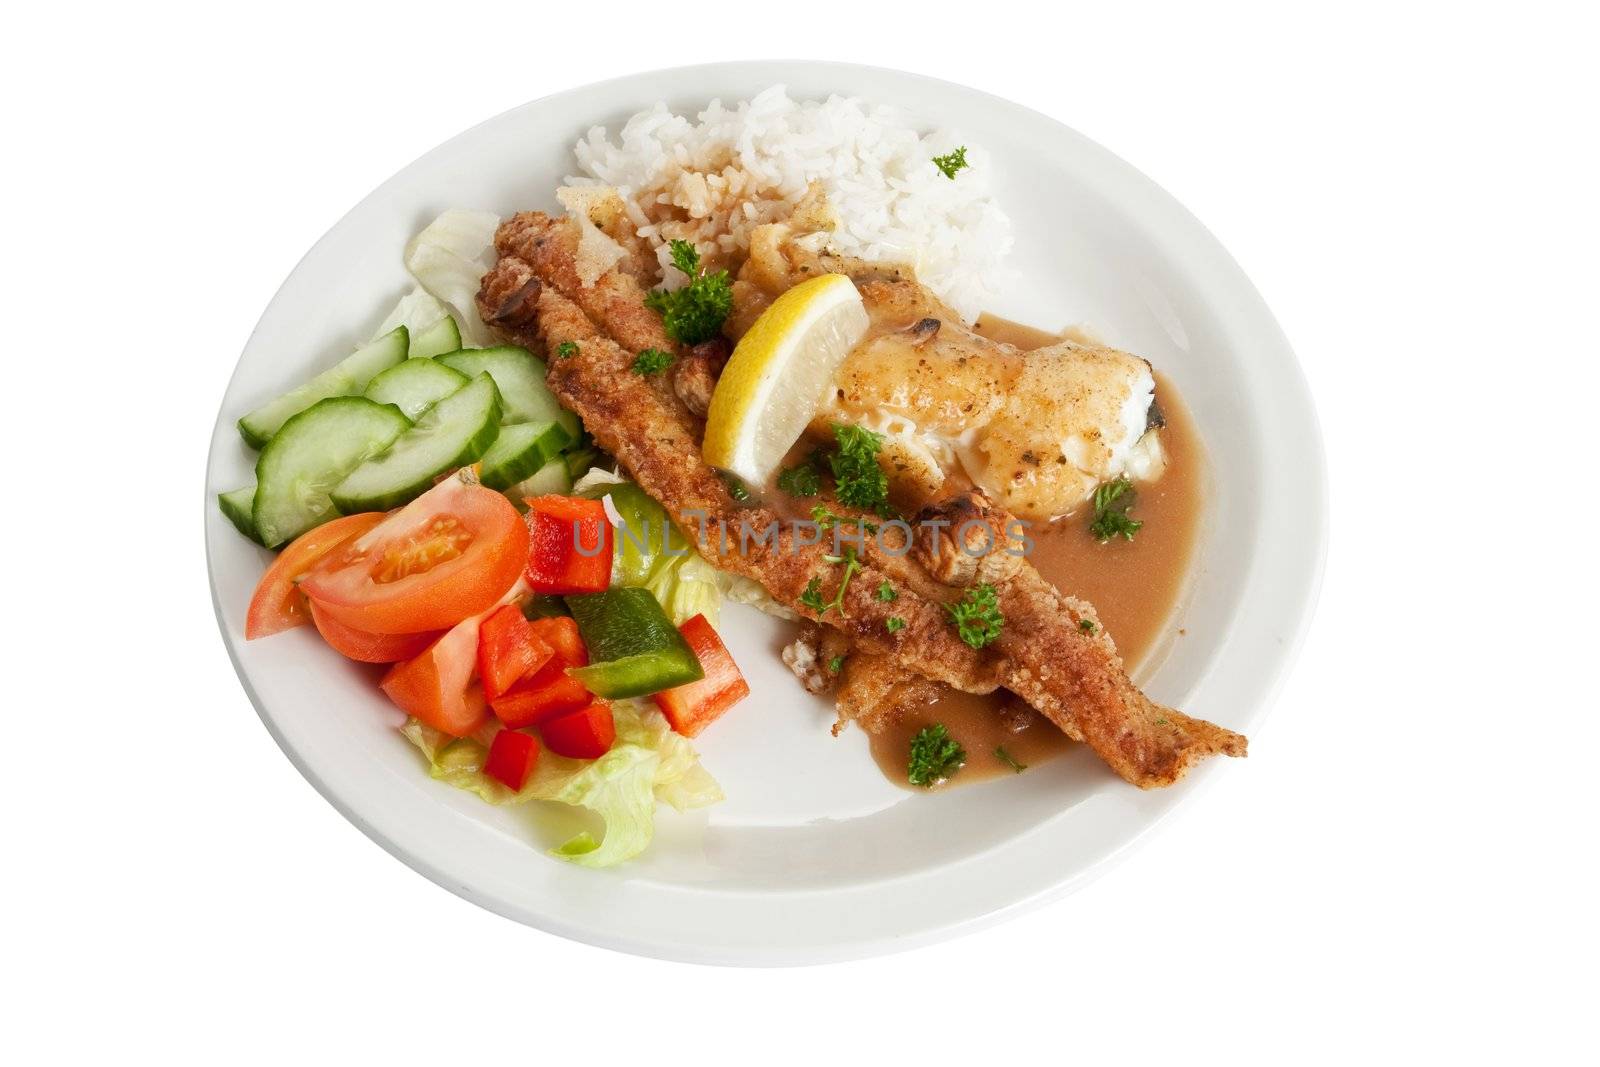 A dish of fried fish and rice with the recomended amount of food for an average sized person.